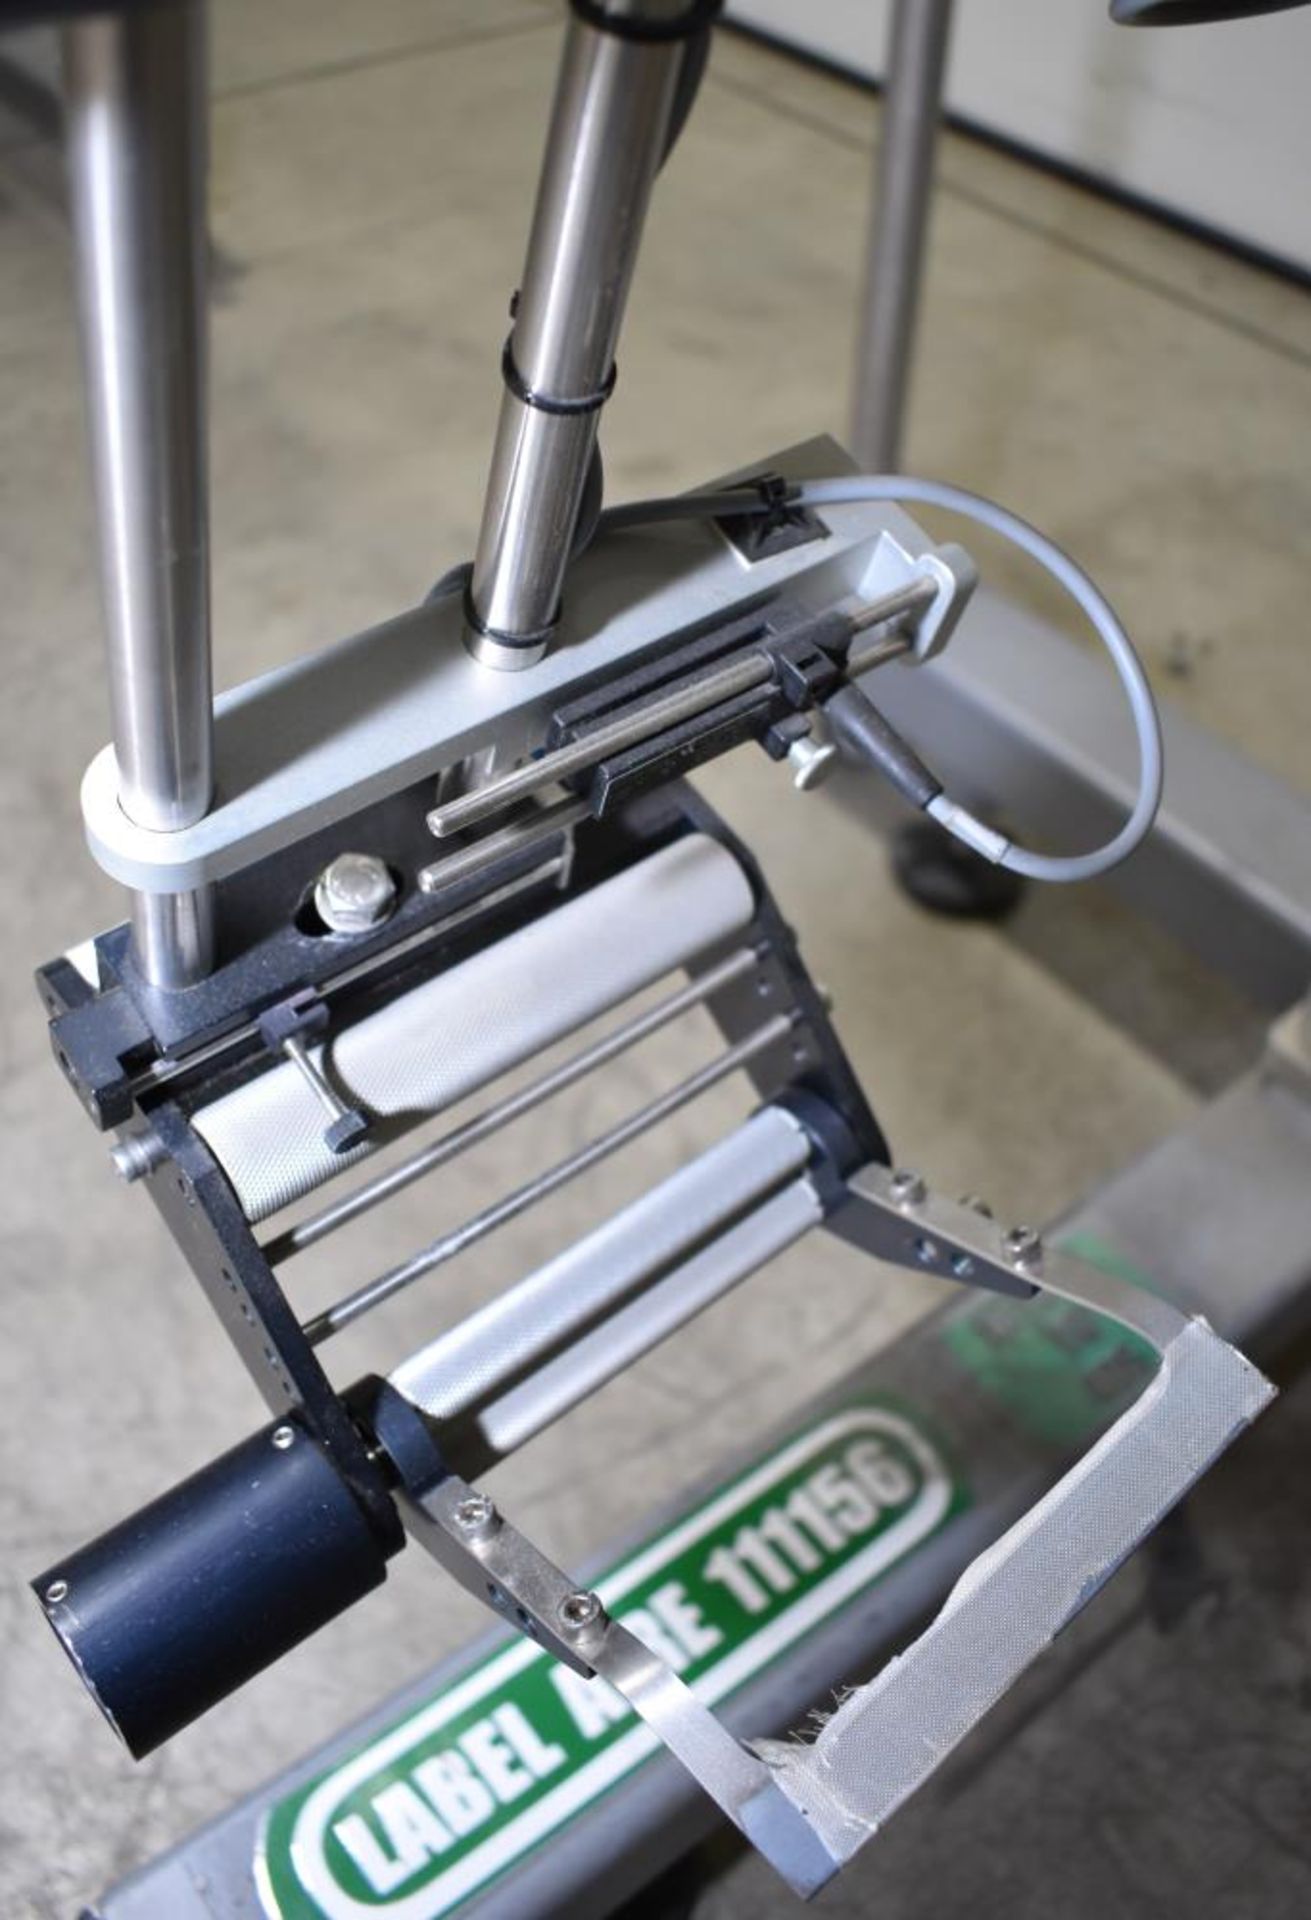 Accraply Pressure Sensitive Labeler - Image 10 of 14